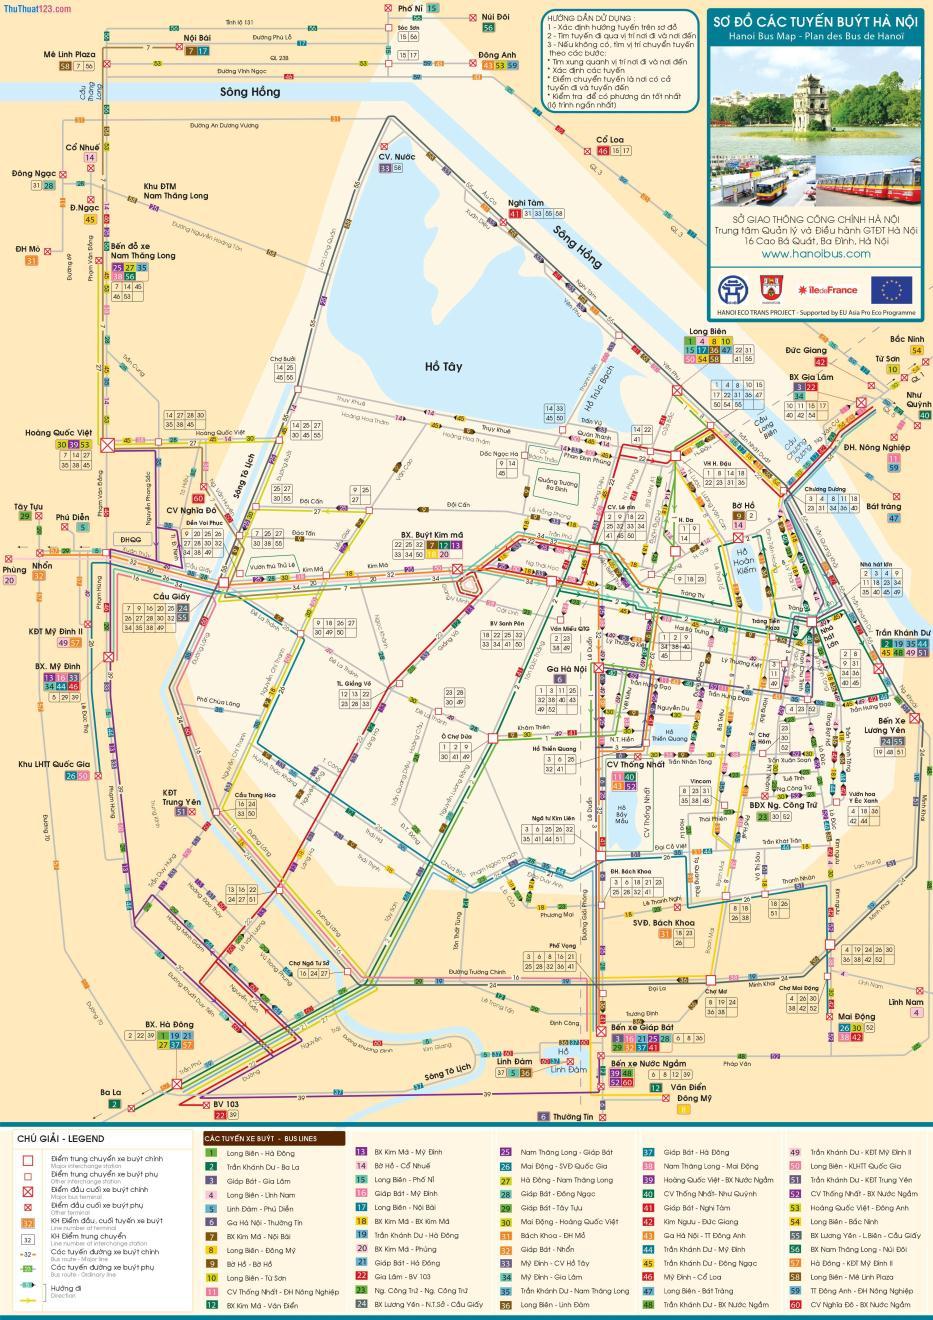 Current public bus network is extended to 97 routes covering inner city, suburbs,